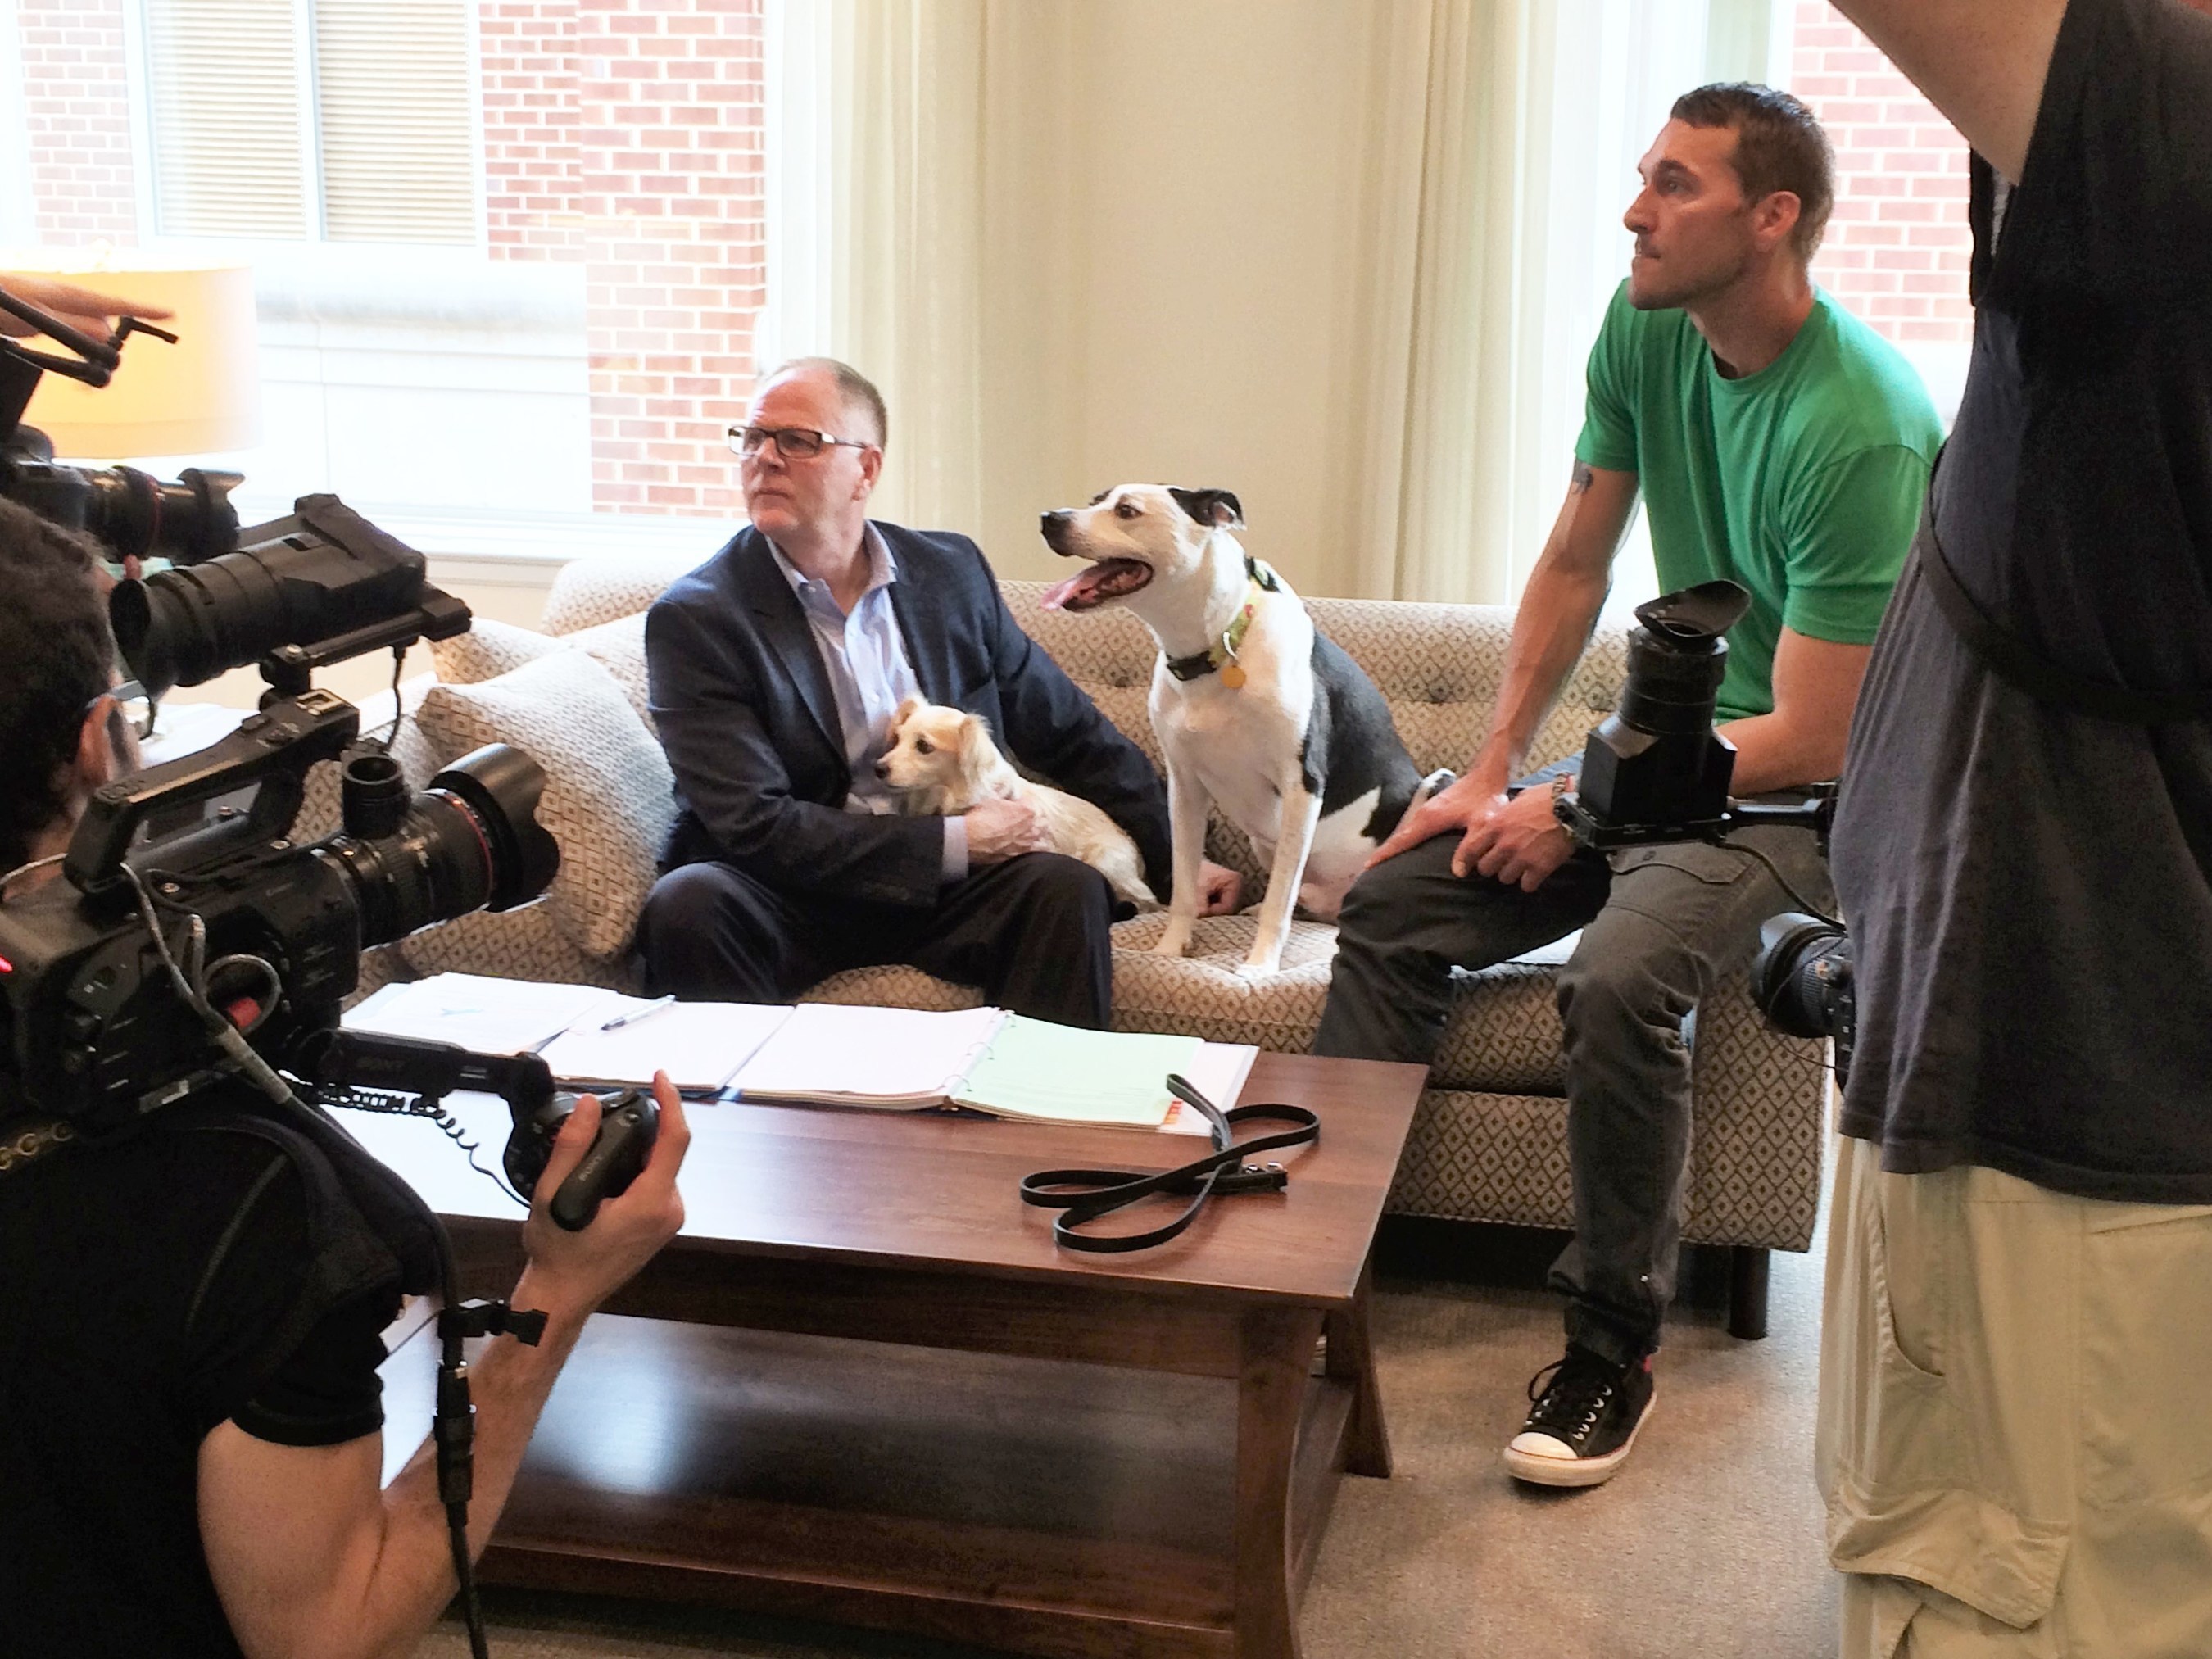 Kris Kiser; rescue dog Dottie; Lucky the TurfMutt, and Brandon McMillan of Lucky Dog discuss the new episode with the production team.